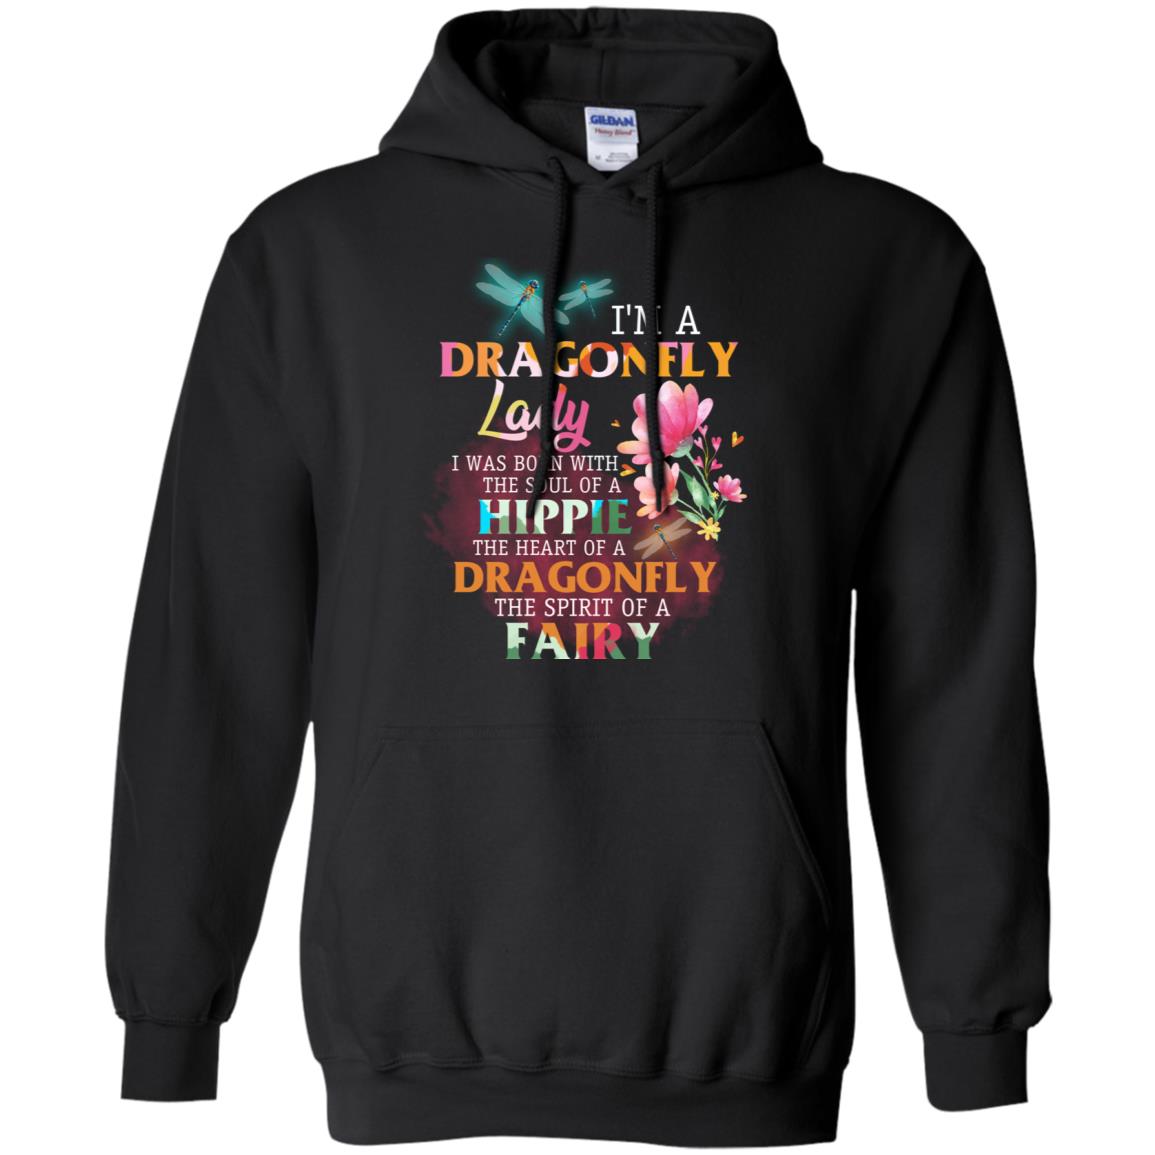 Im A Dragonfly Lady I Was Born With The Soul Of A Hippie The Heart Of A Dragonfly The Spirit Of A FairyG185 Gildan Pullover Hoodie 8 oz.